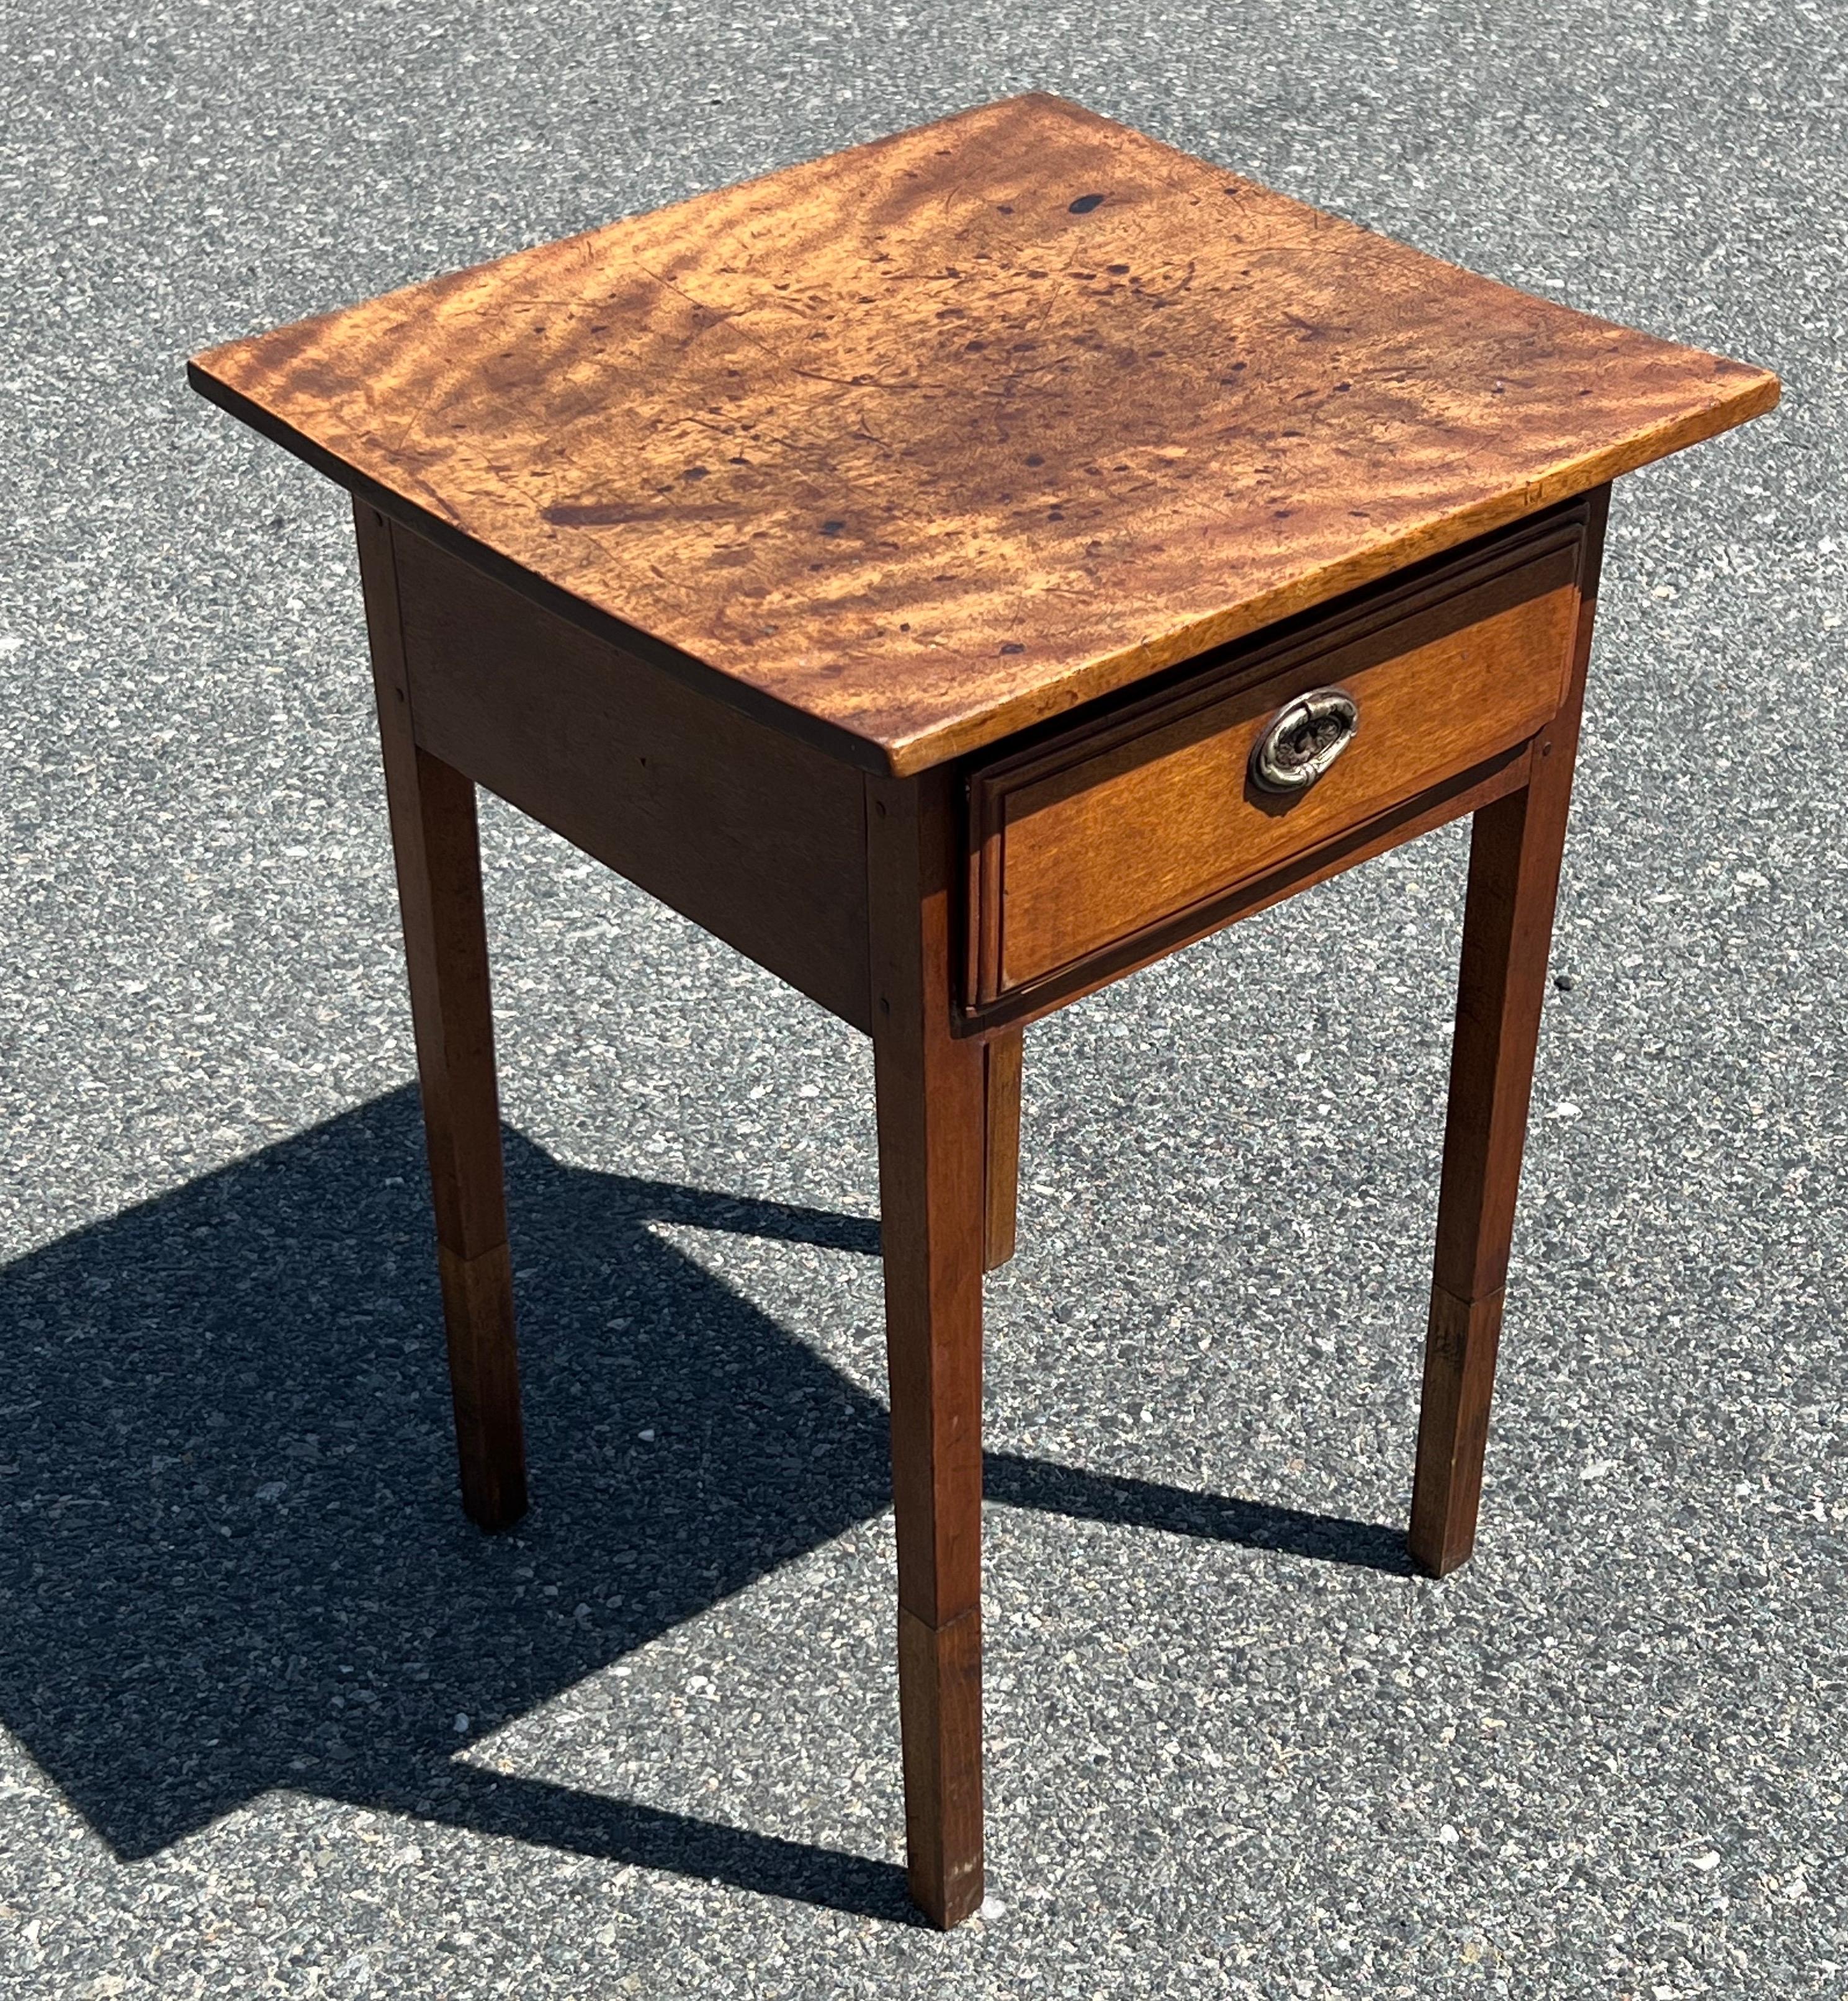 Diminutive 19th century Birch side and/or sewing table with single drawer with stepped drawer face and oval embossed brass pull. On two part tapered legs. Slightly bowed top and old break at bottom right of drawer.